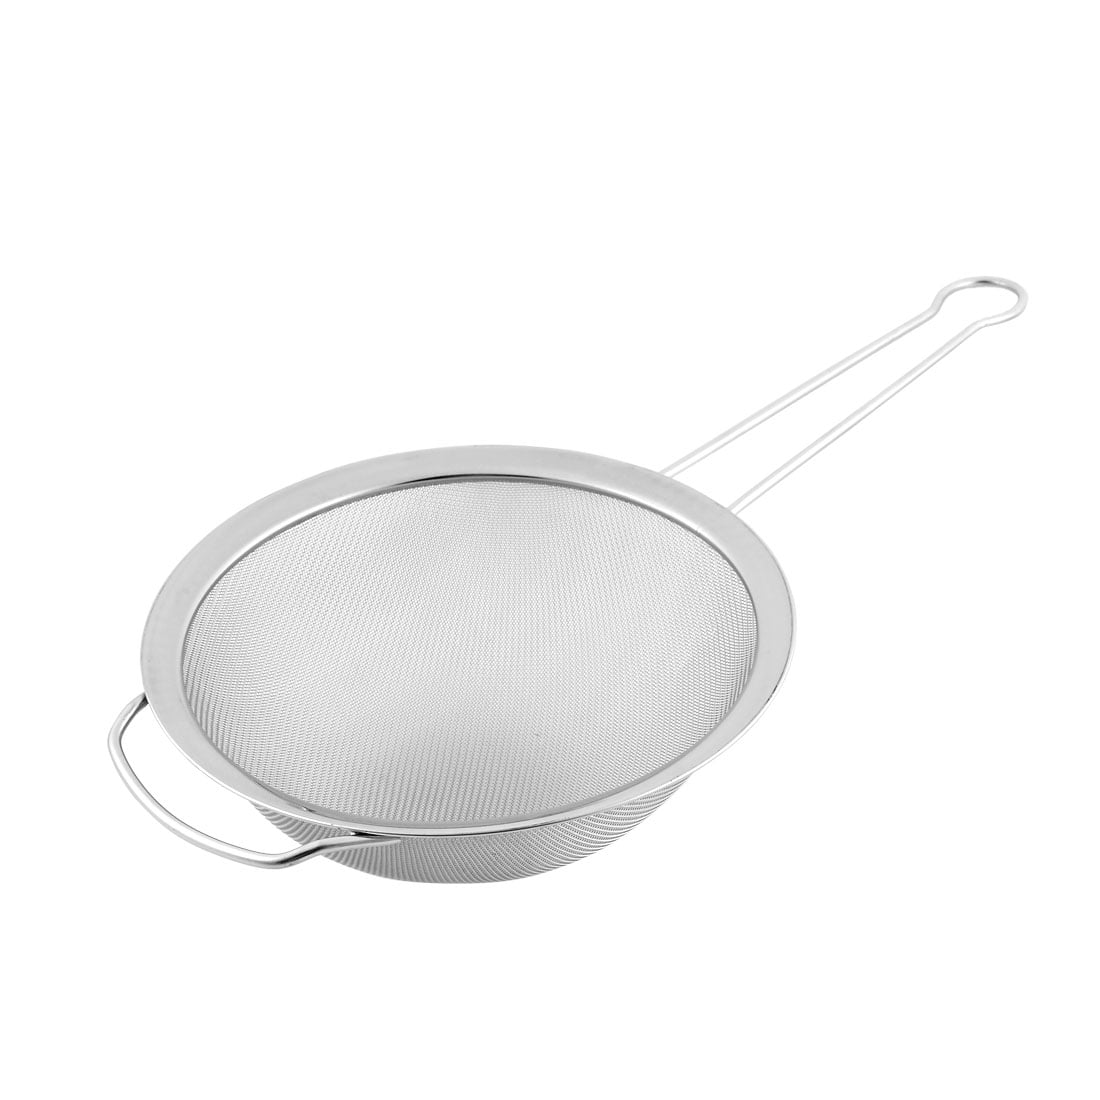 Silver Fine Wire Mesh Kitchen Sieve Set with Rim Prisma 8 cm of Stainless Steel BETOY Conical Strainer 